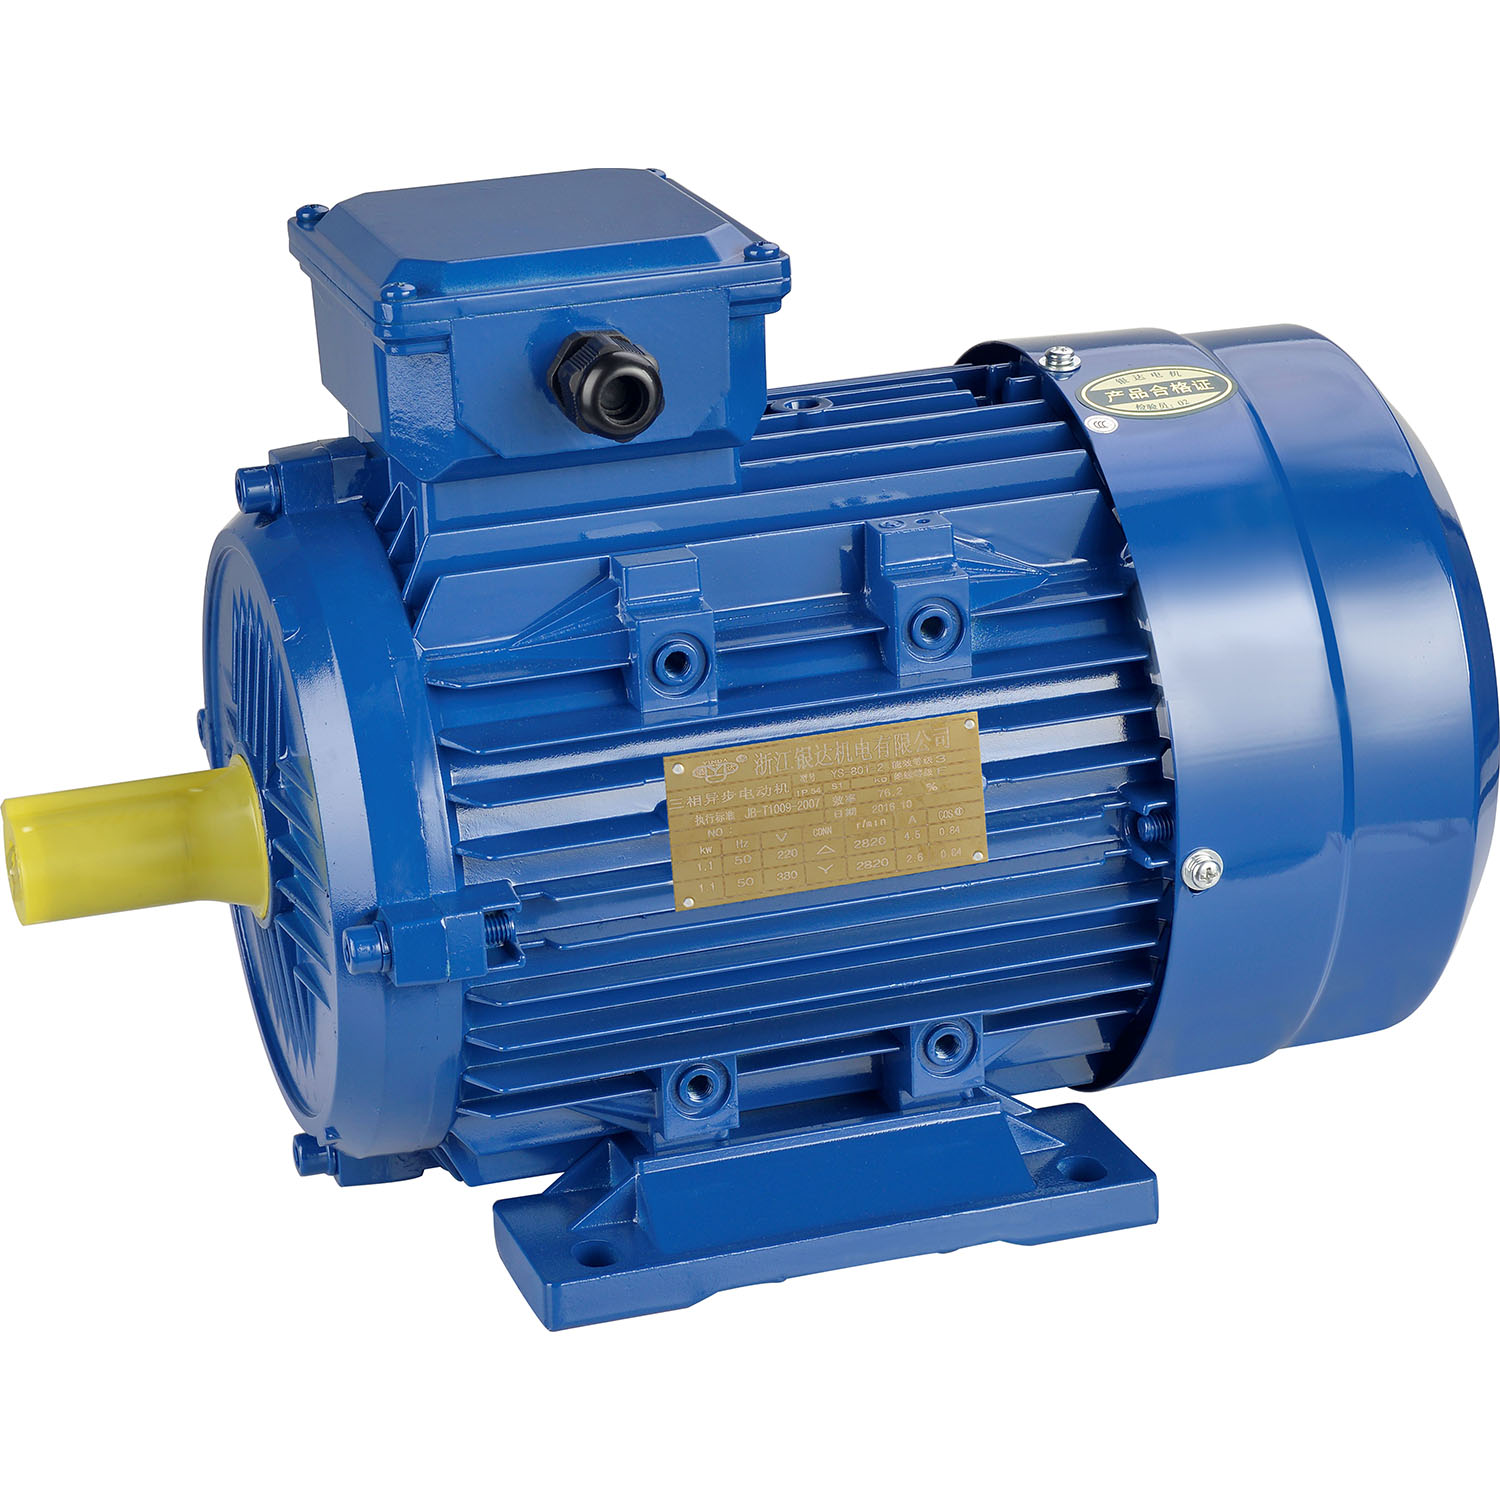 YX3-132M2-6 5.5KW 7.5HP aluminum cylinder series high efficiency three-phase asynchronous motor